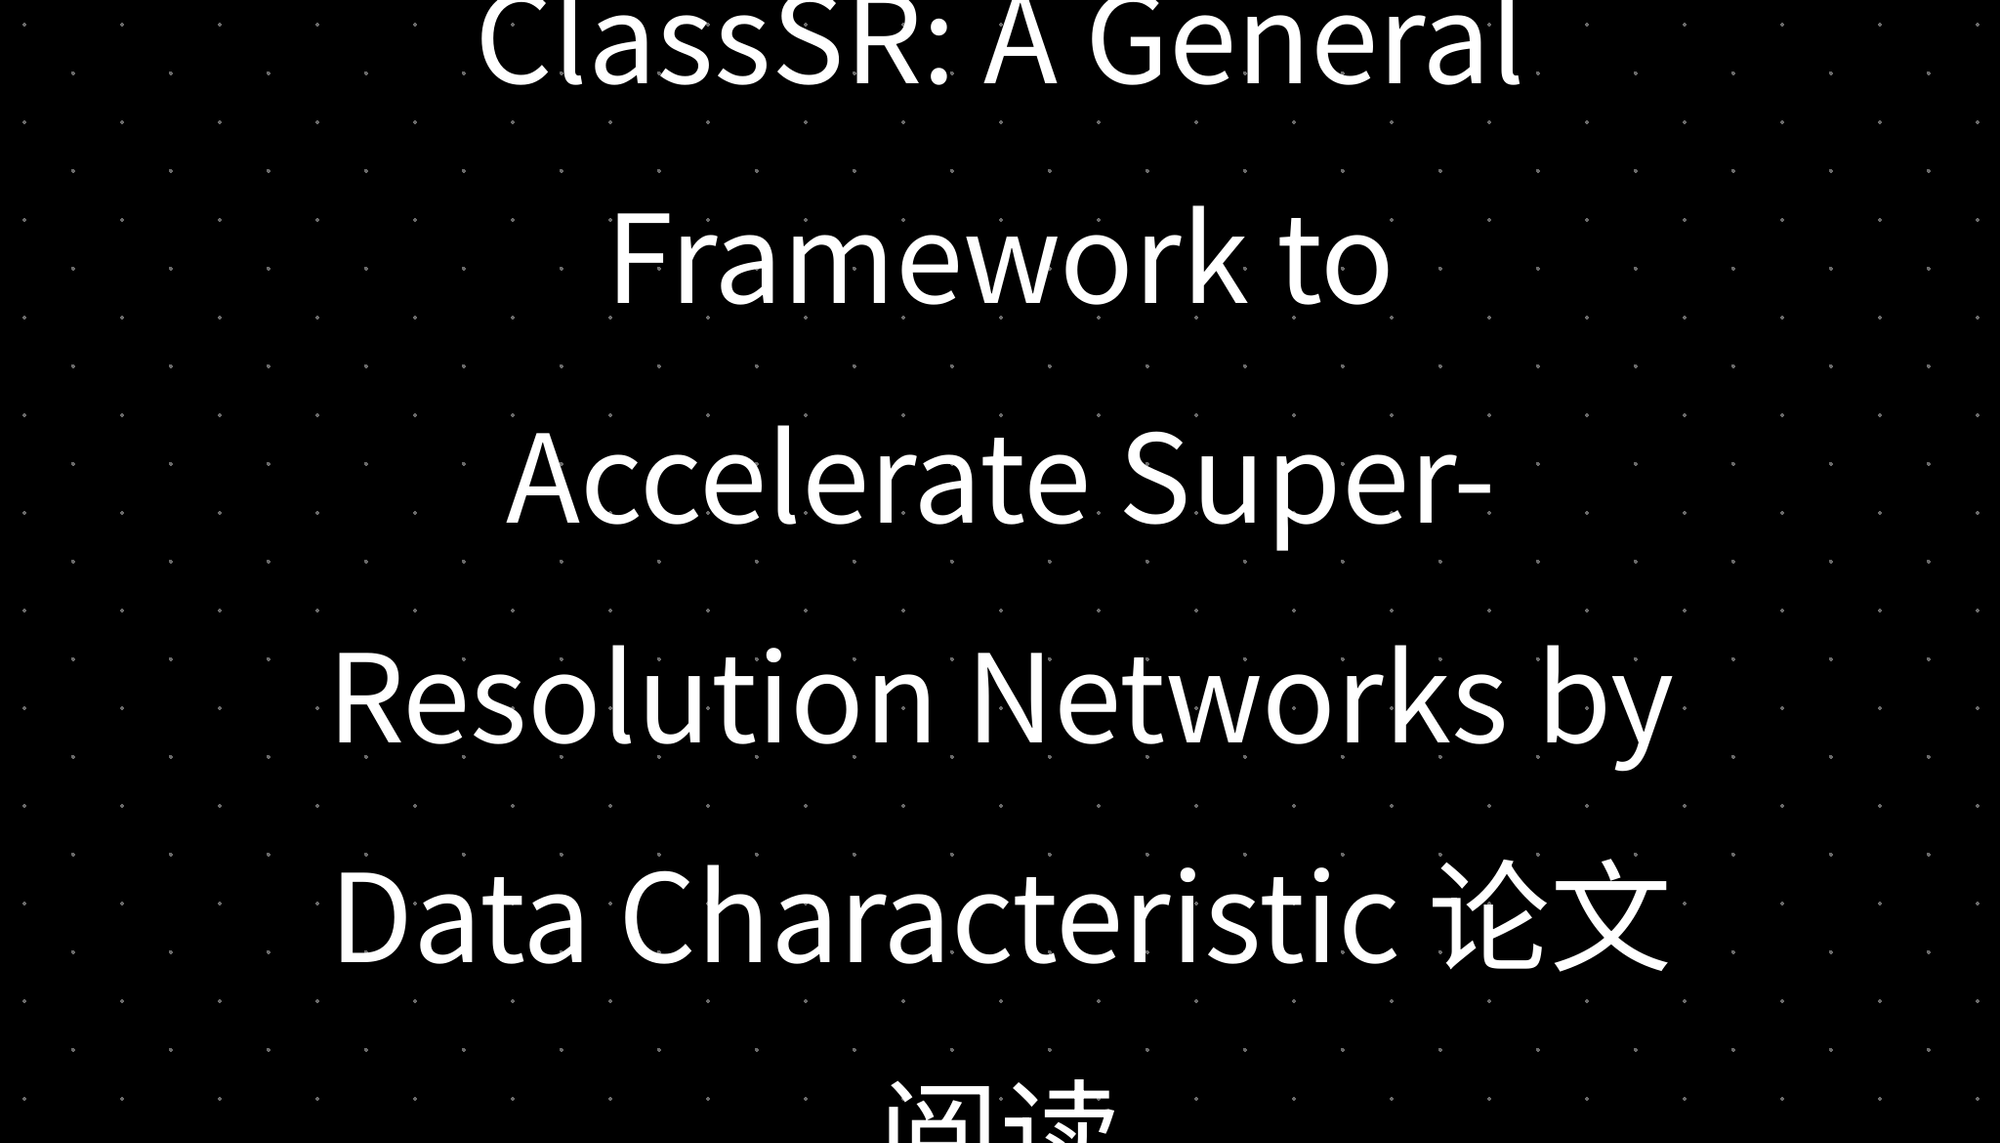 ClassSR: A General Framework to Accelerate Super-Resolution Networks by Data Characteristic 论文阅读